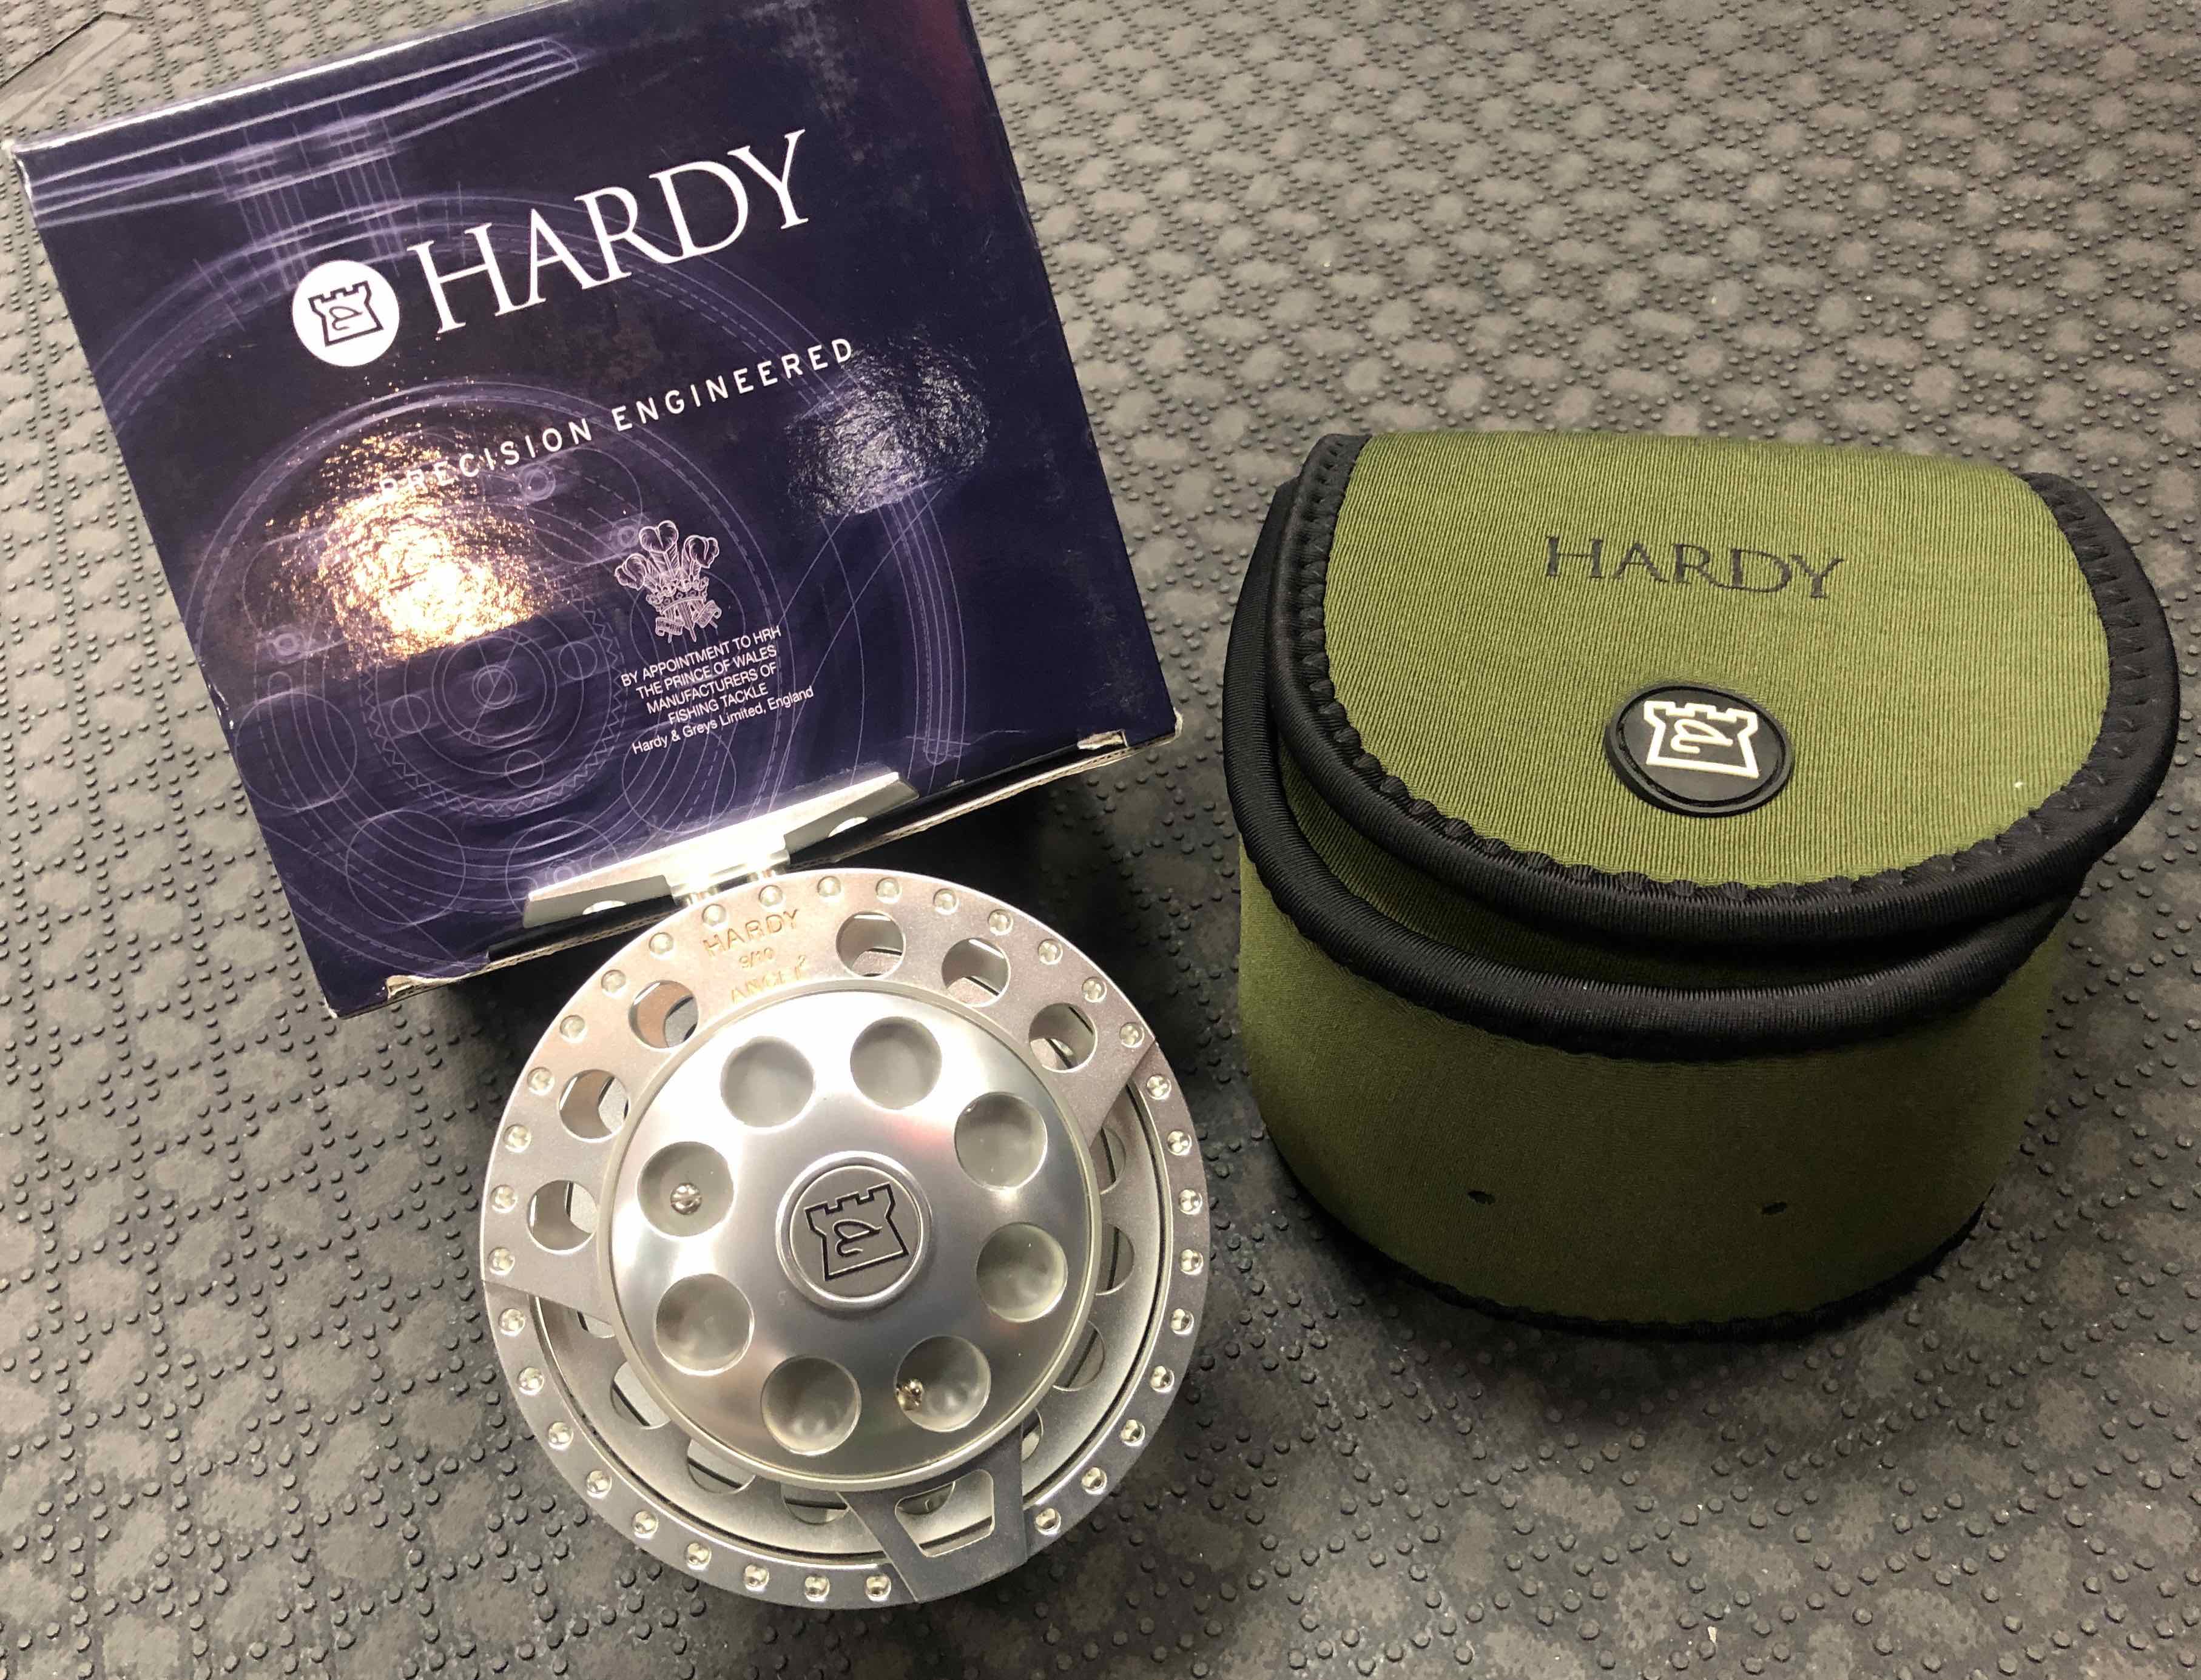 Hardy Angel 2 - 9/10 - New in Box Never Spooled Complete with Pouch and Warranty Card -BRAND NEW! - $365